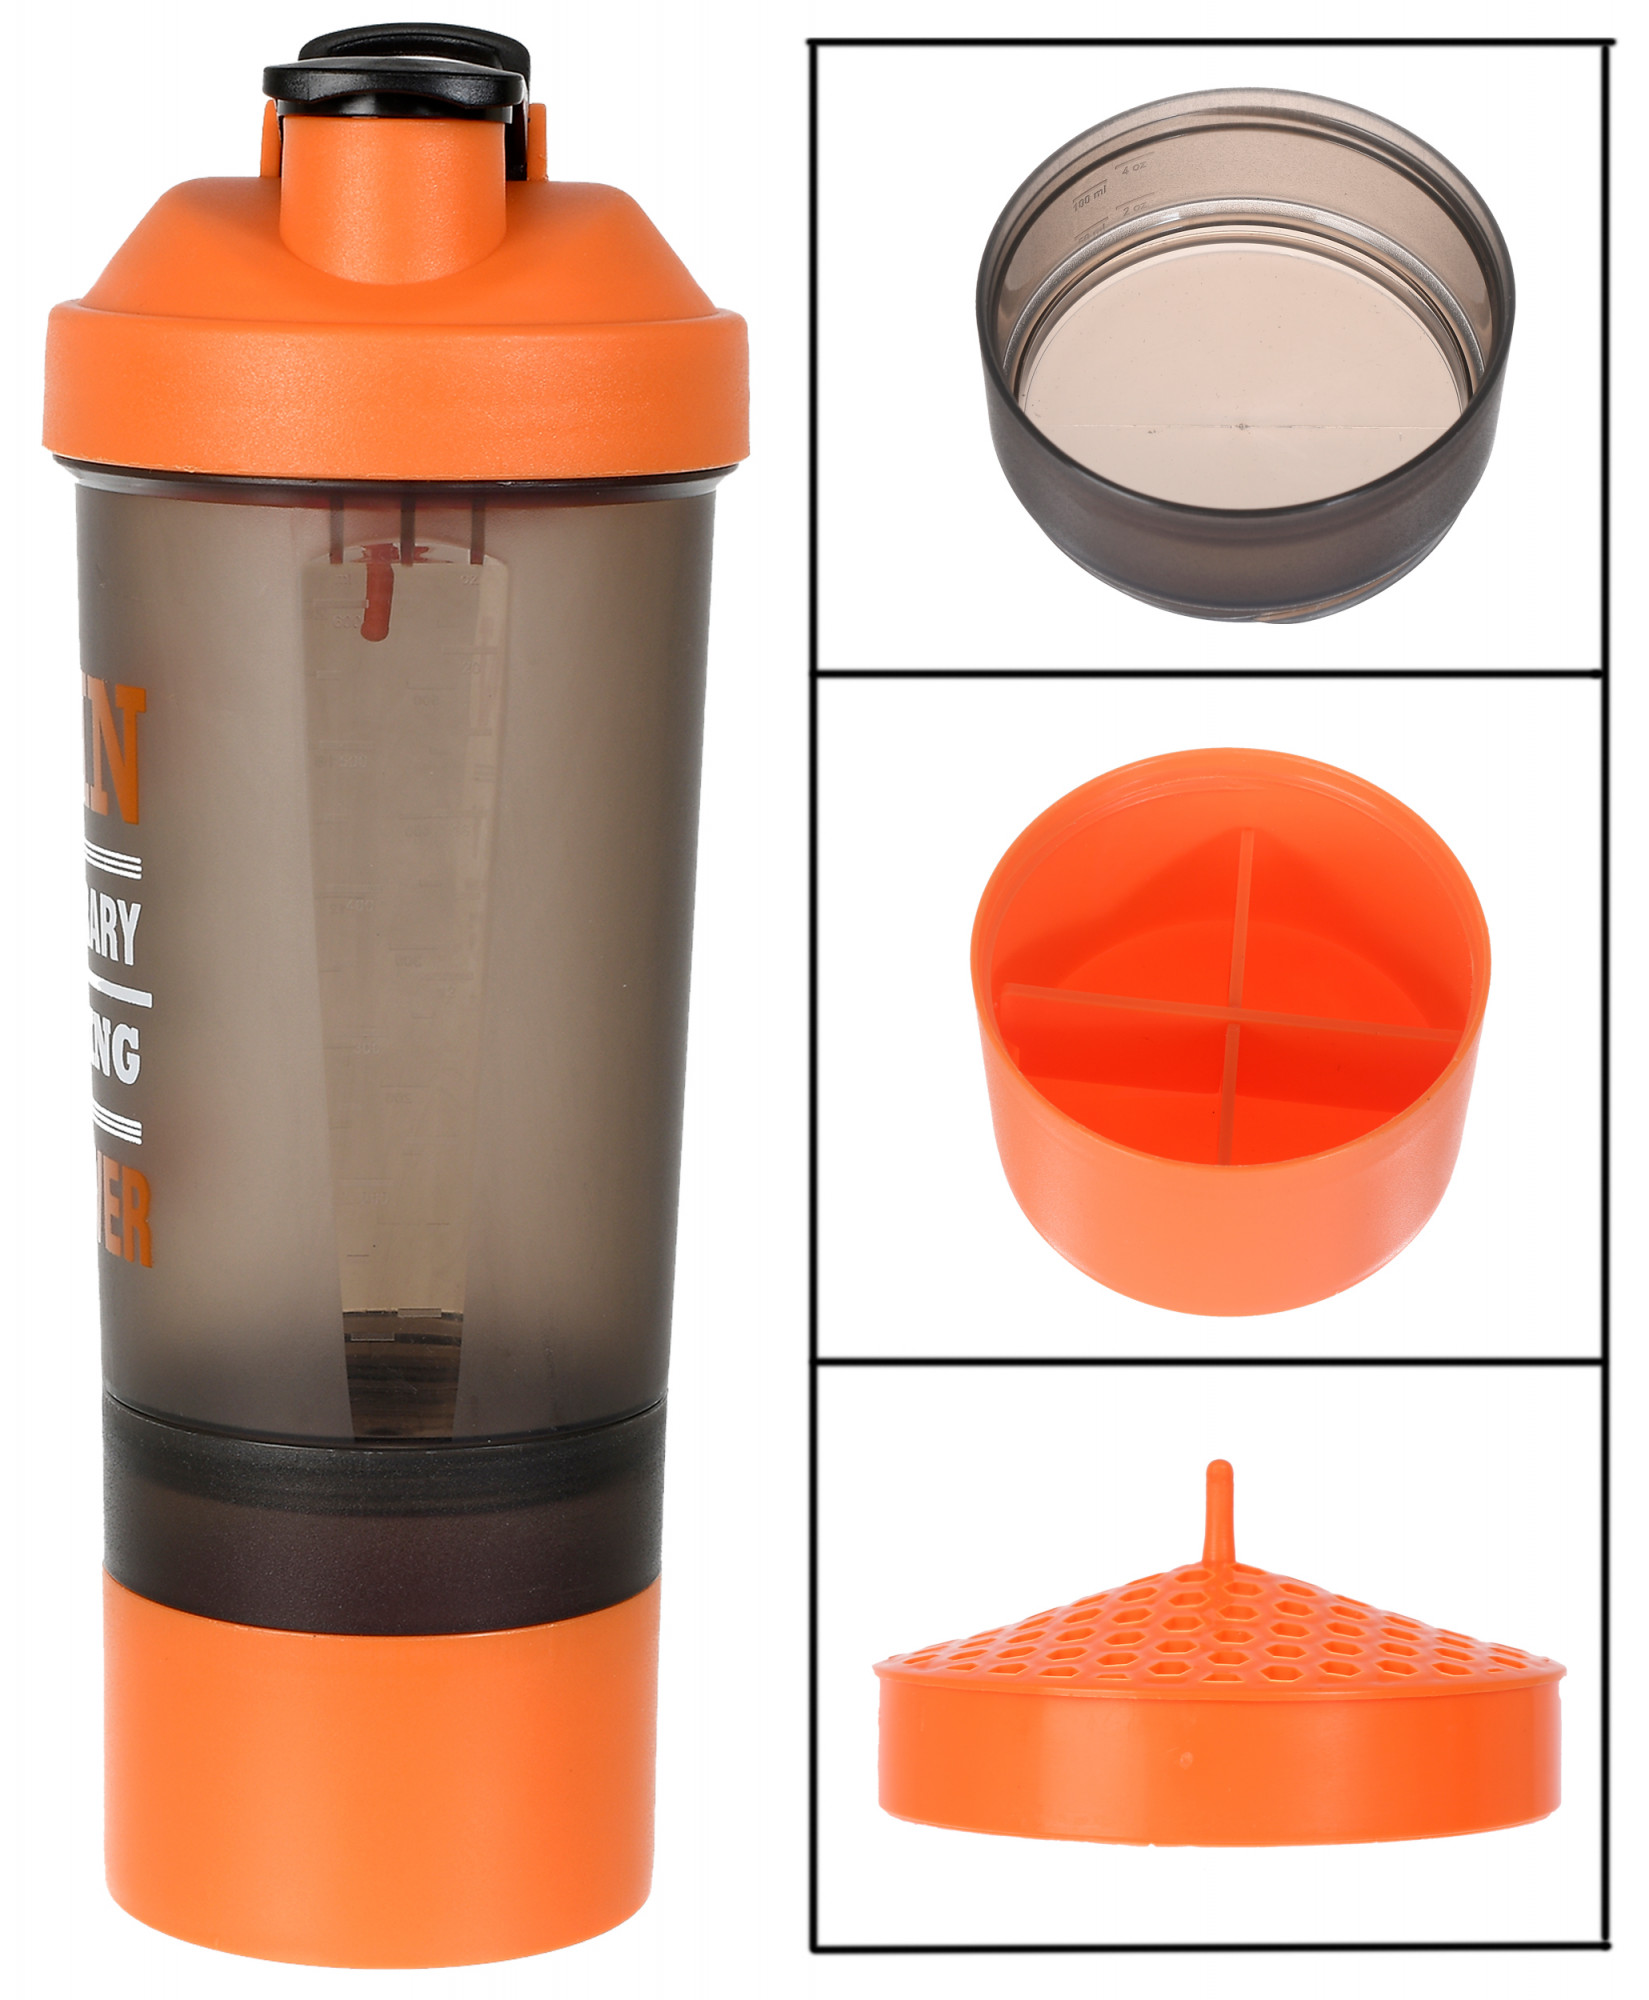 Kuber Industries Classic Shaker Bottle Perfect for Protein Shakes and Pre Workout with Pill Organizer and Storage for Protein Powder (Orange)